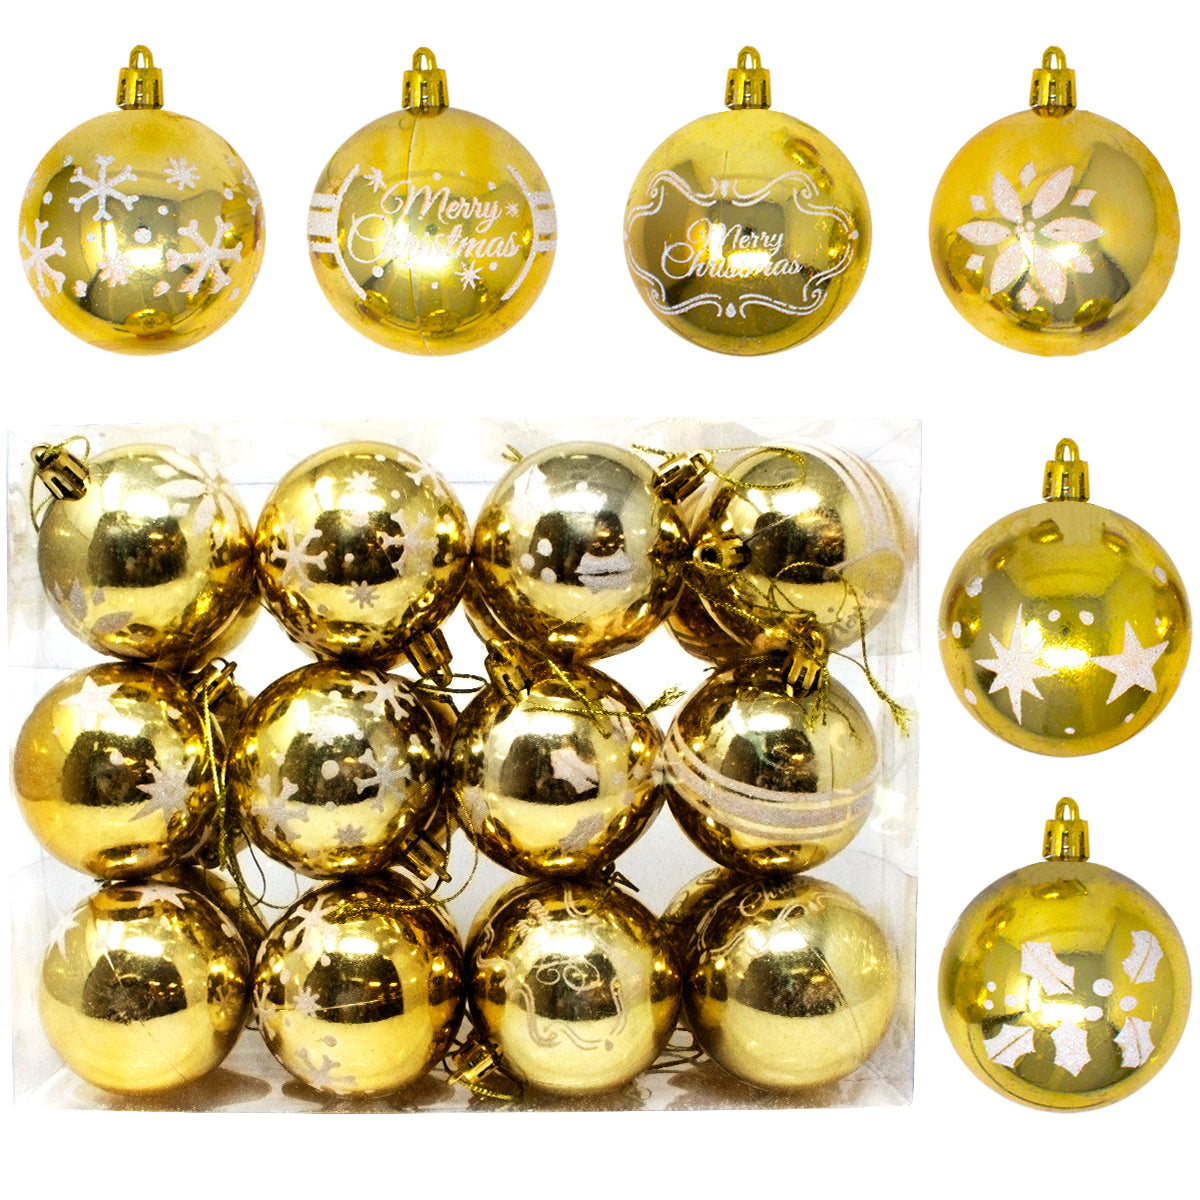 60mm/2.36" Gold Christmas Ornament with Glittering Painting 24Pcs